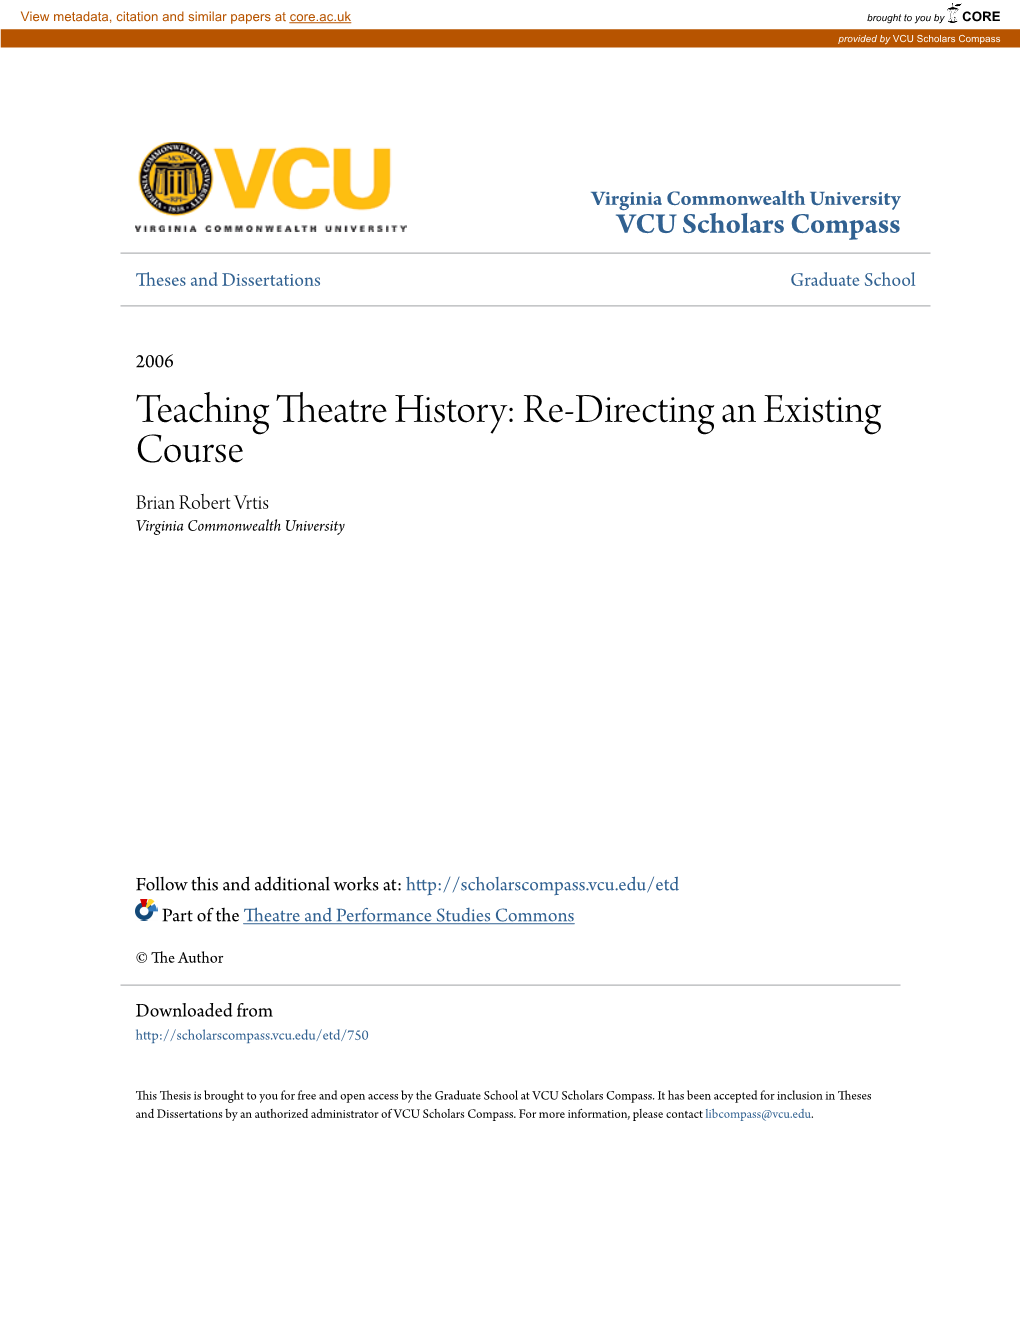 Teaching Theatre History: Re-Directing an Existing Course Brian Robert Vrtis Virginia Commonwealth University